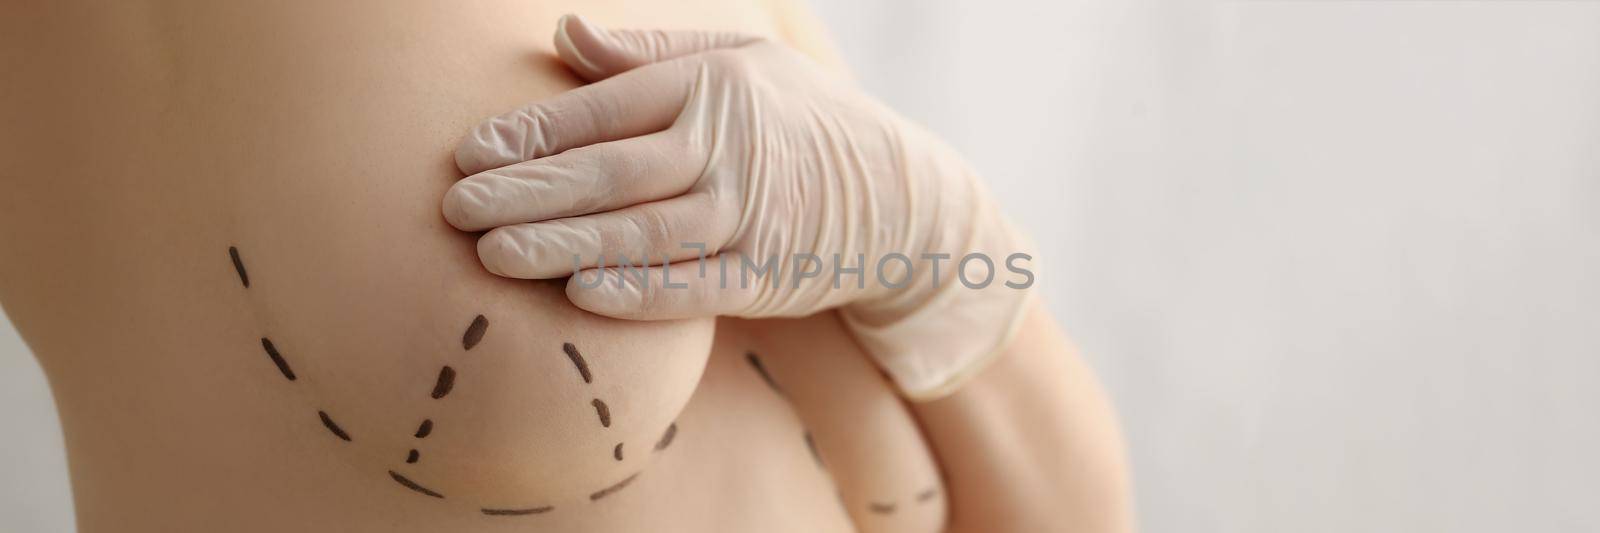 Close-up of female with marking on boobs for cosmetic surgery procedure, ready for bigger breasts, final step before surgery. Modern medicine, beauty, plastic, cosmetic surgery concept